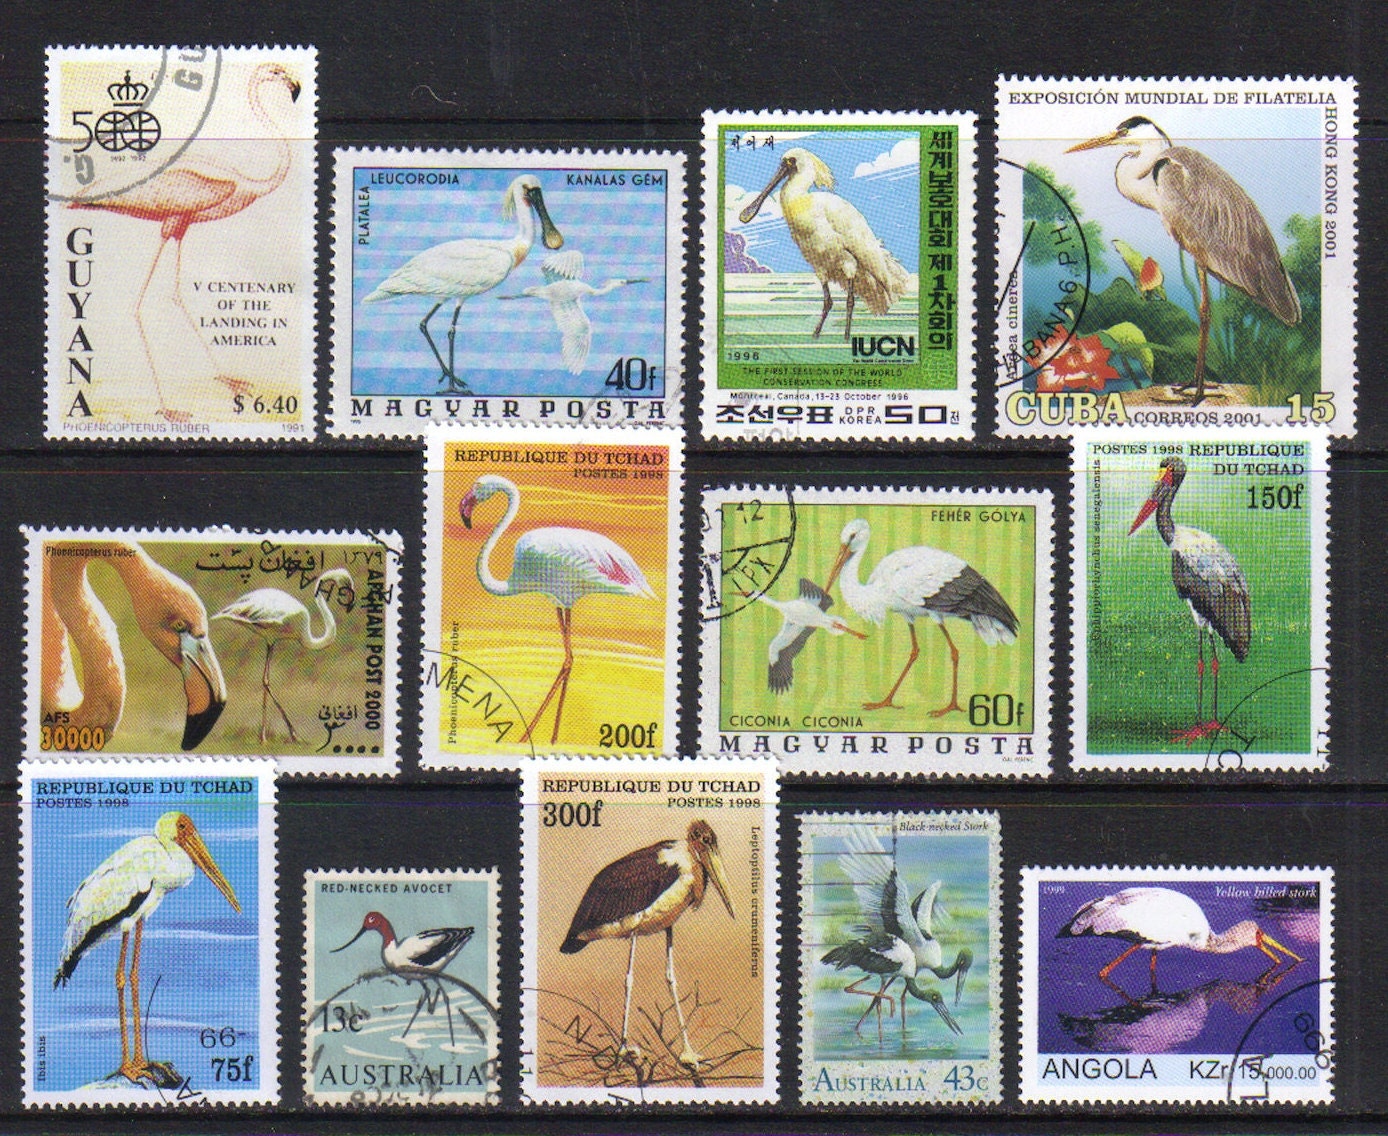 Vintage postage stamps - Flamingo and other wading birds